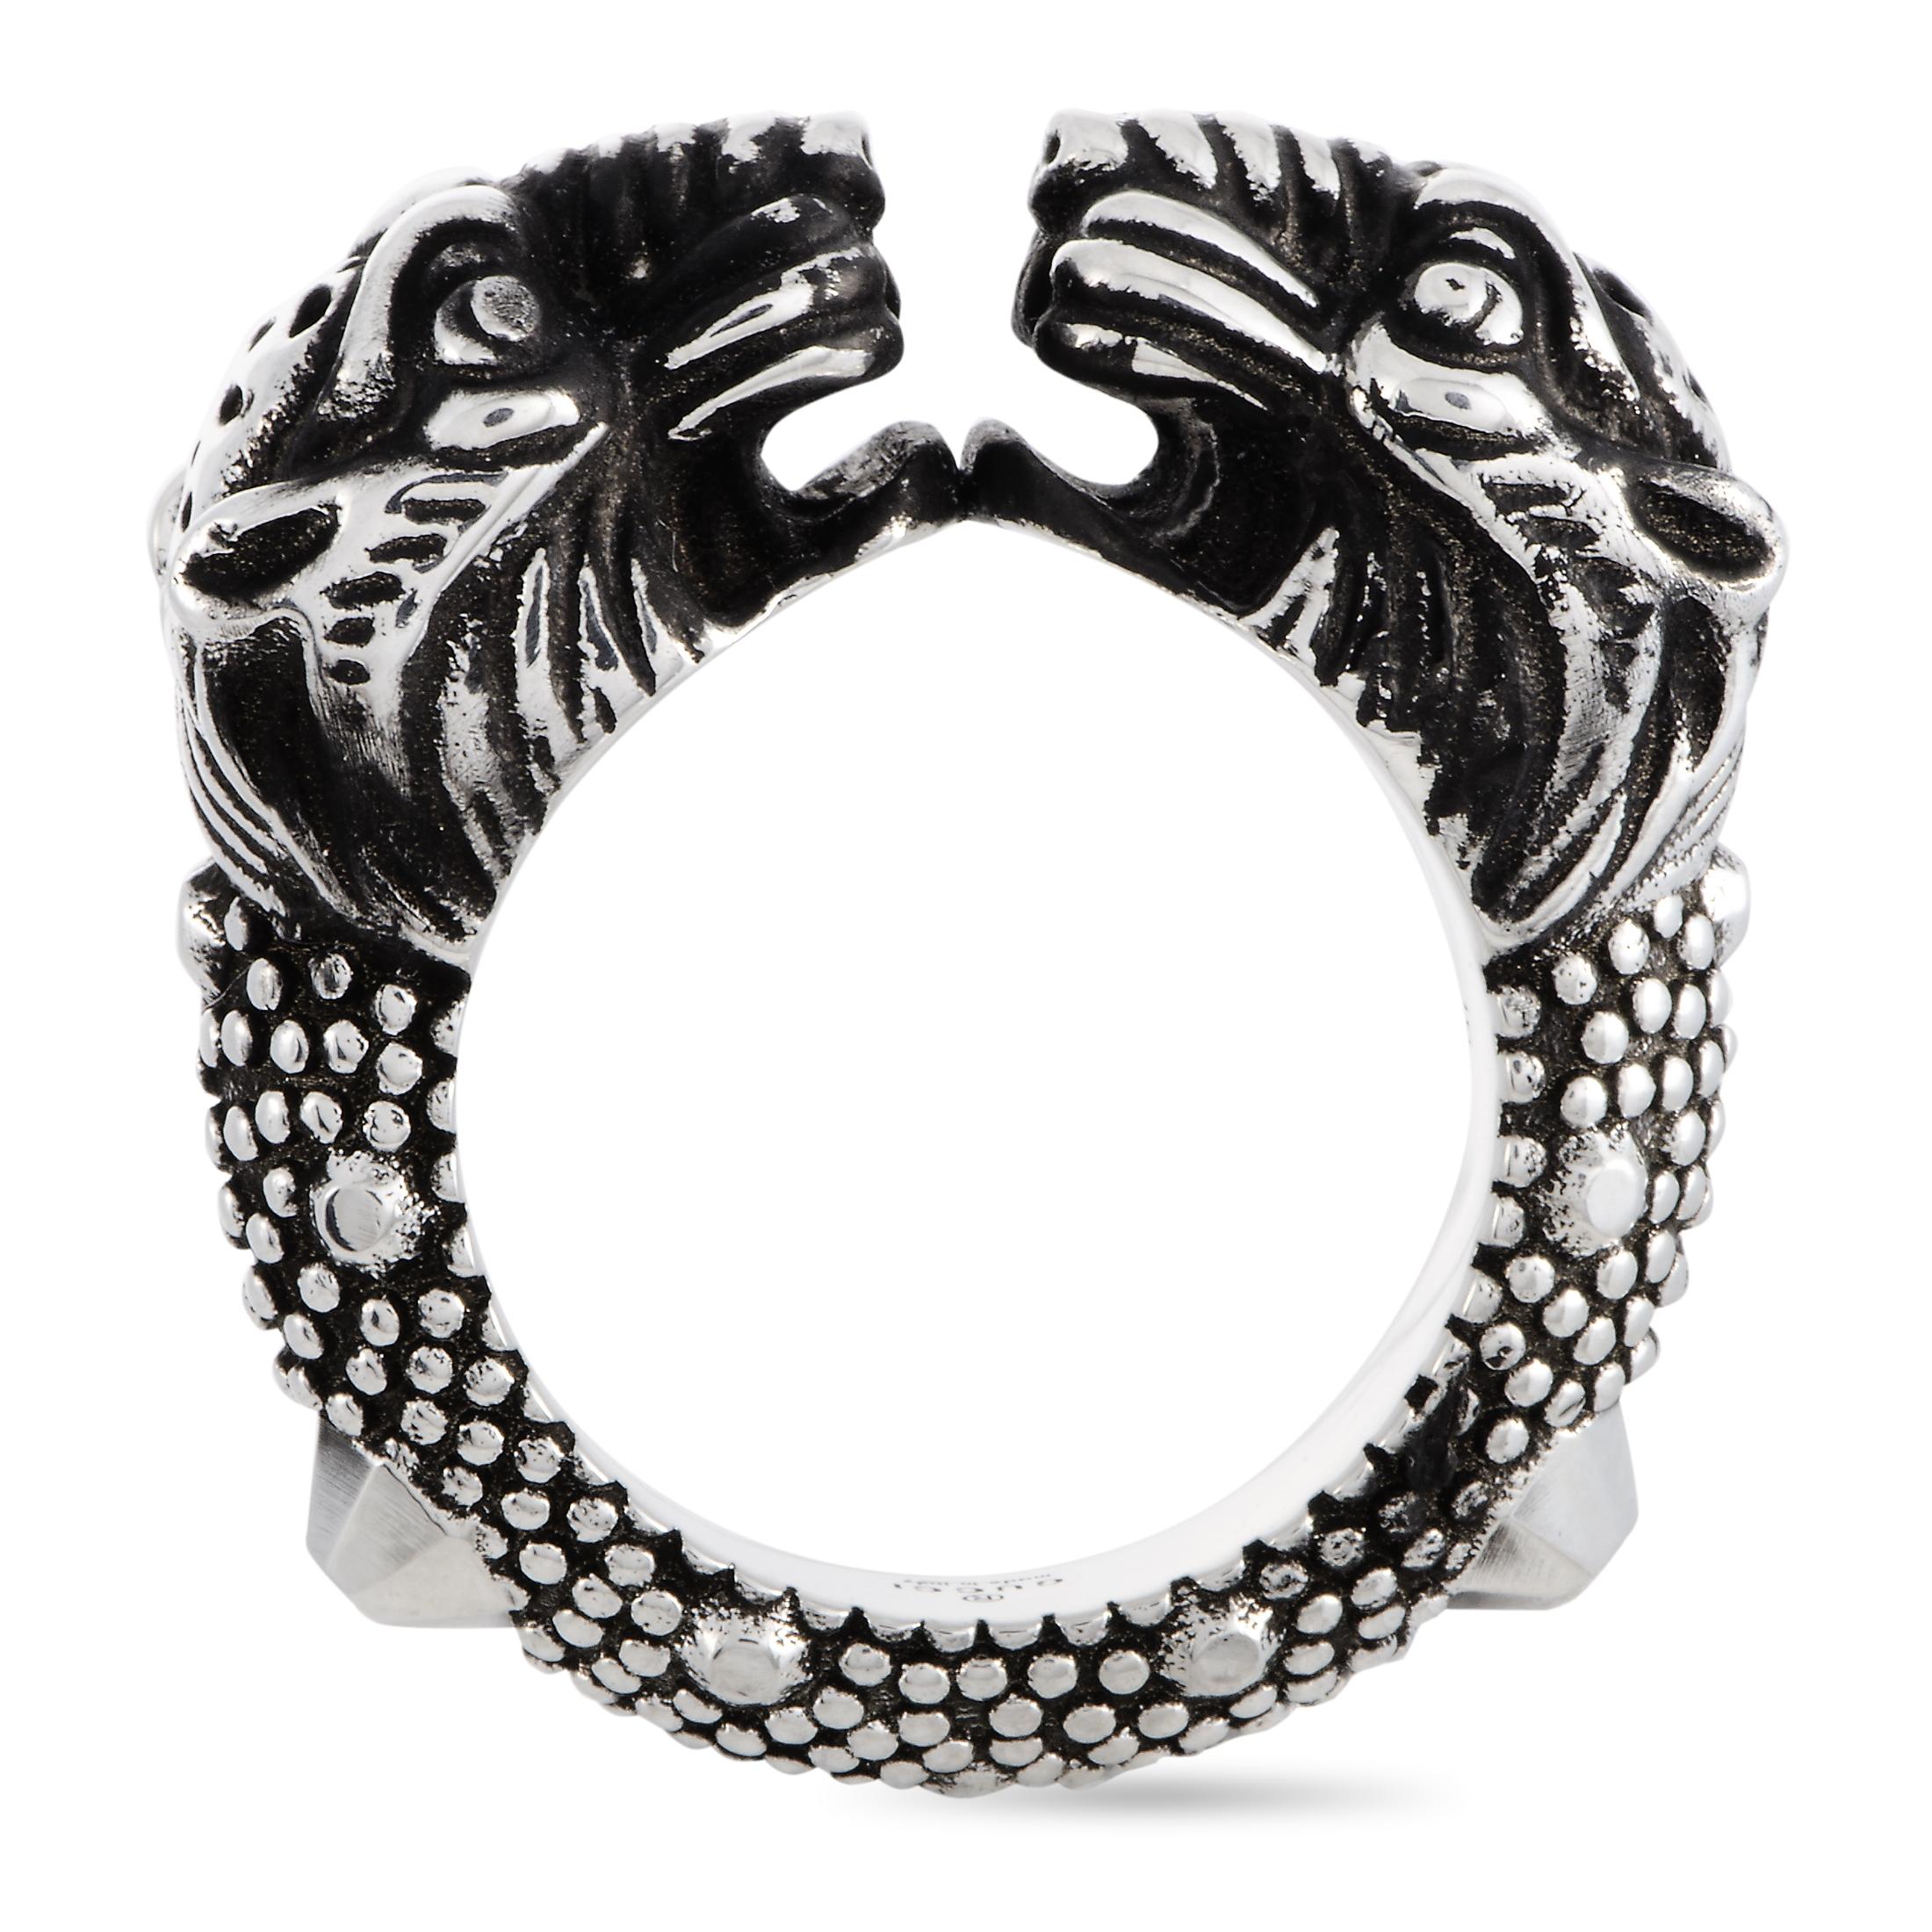 The Gucci “Vintage Tiger” ring is crafted from silver and weighs 16.7 grams. The ring boasts band thickness of 7 mm and top height of 10 mm, while top dimensions measure 12 by 30 mm.
 
 This item is offered in brand new condition and includes the a